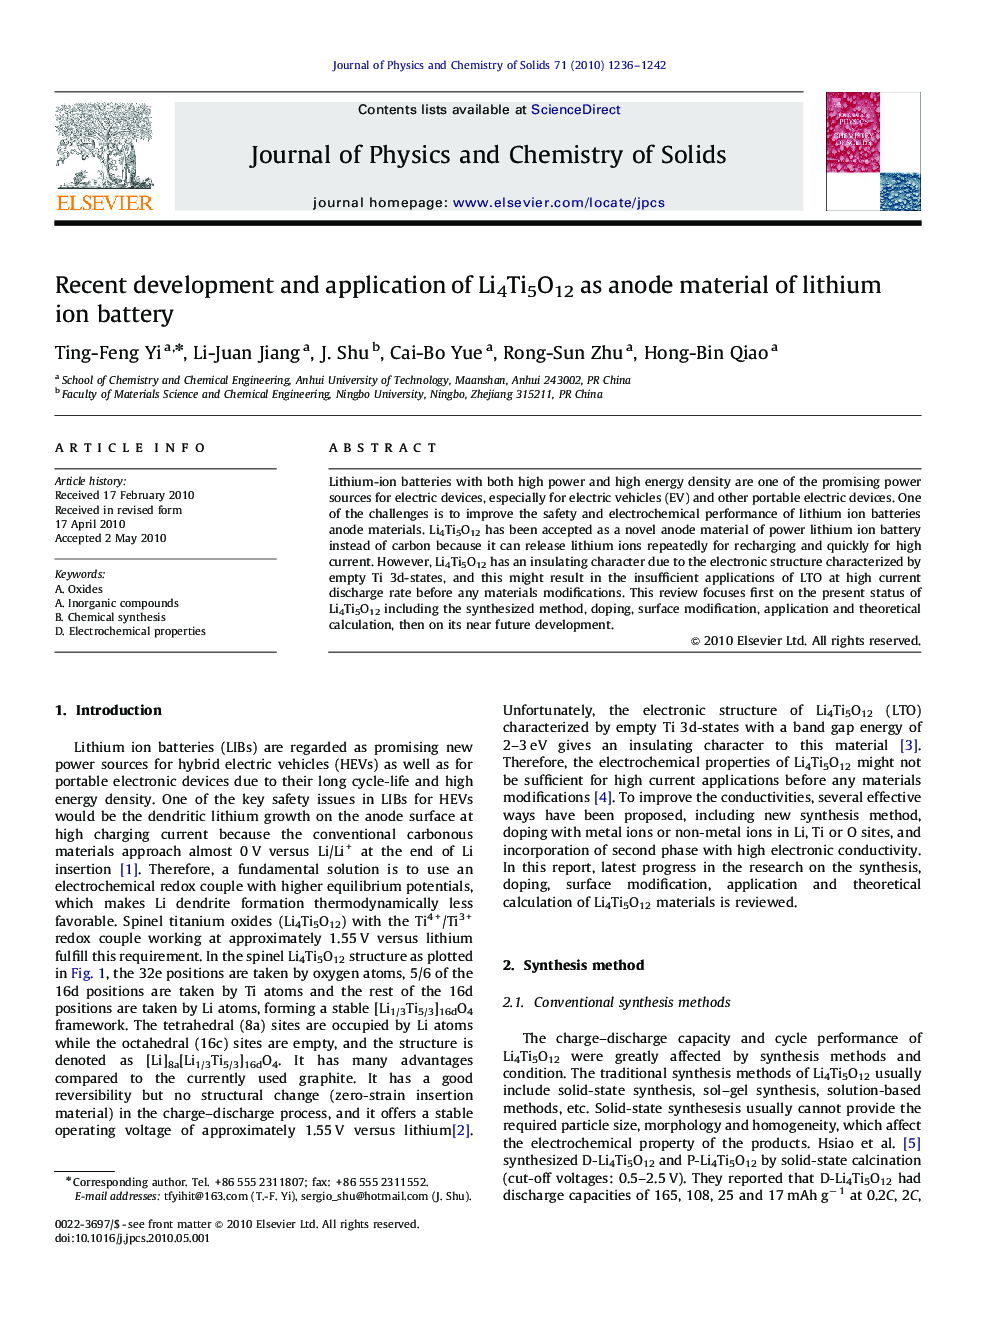 Recent development and application of Li4Ti5O12 as anode material of lithium ion battery